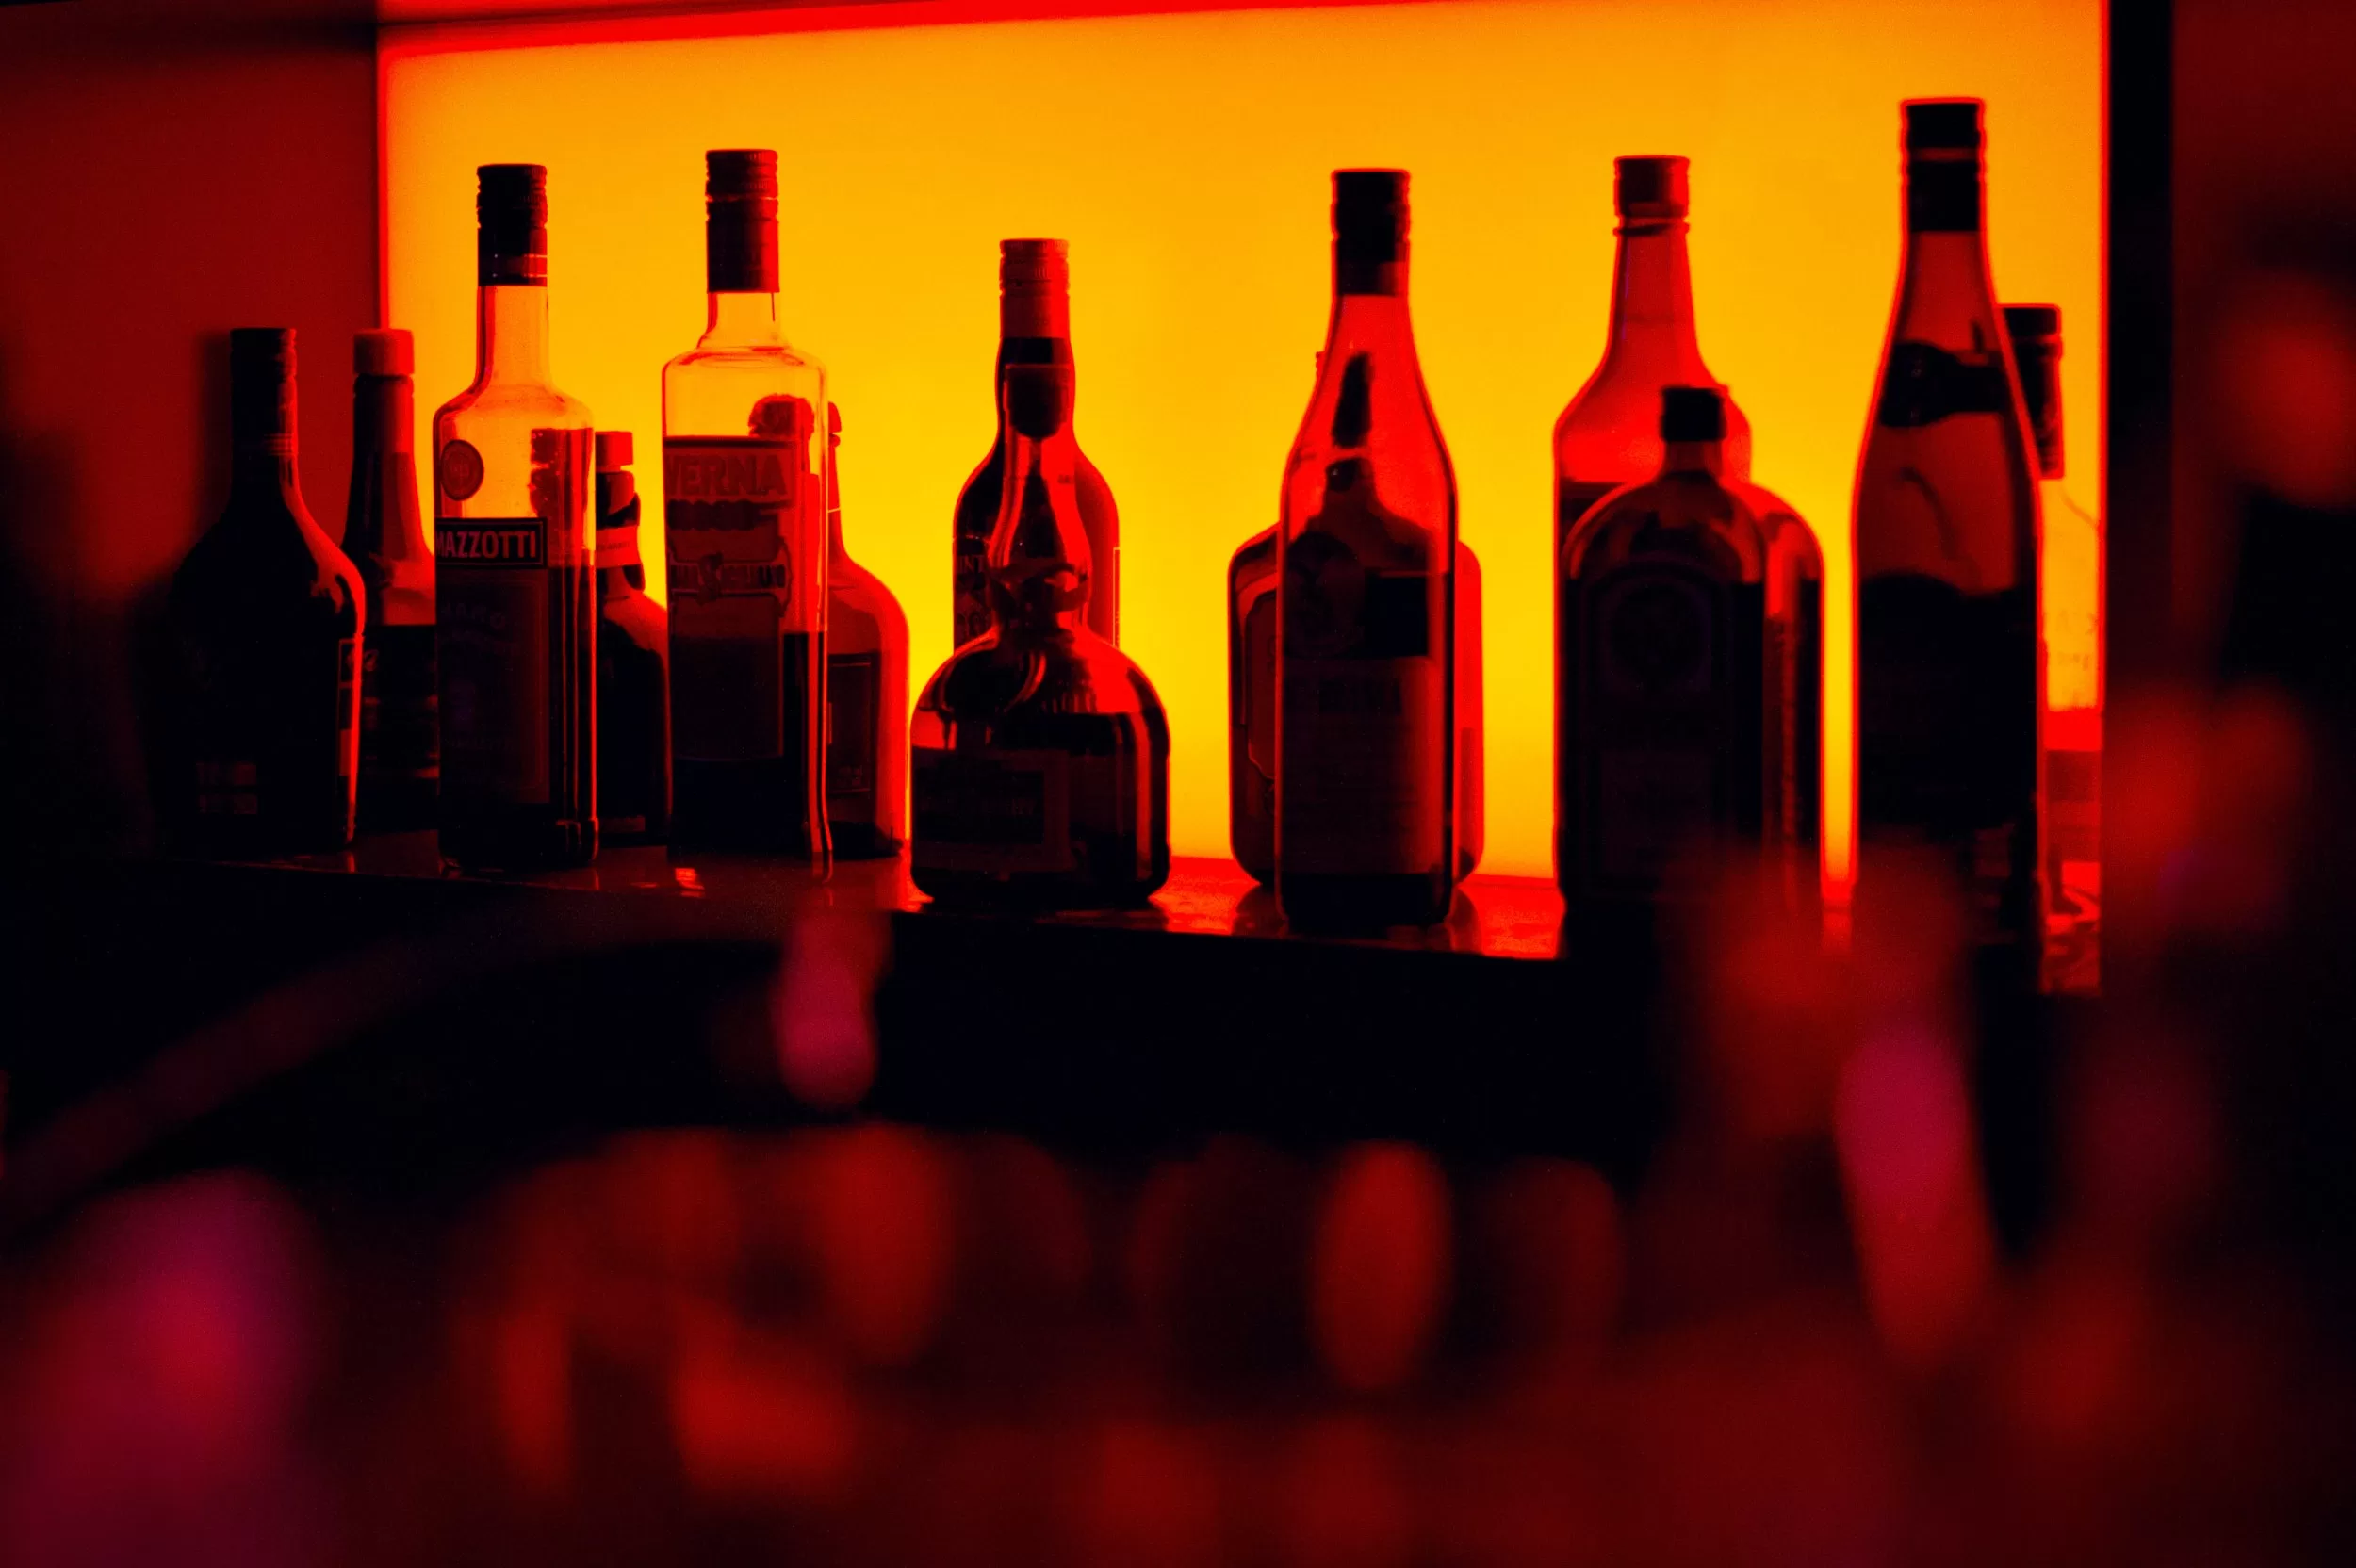 Is it a bad idea for believers to go to bars?